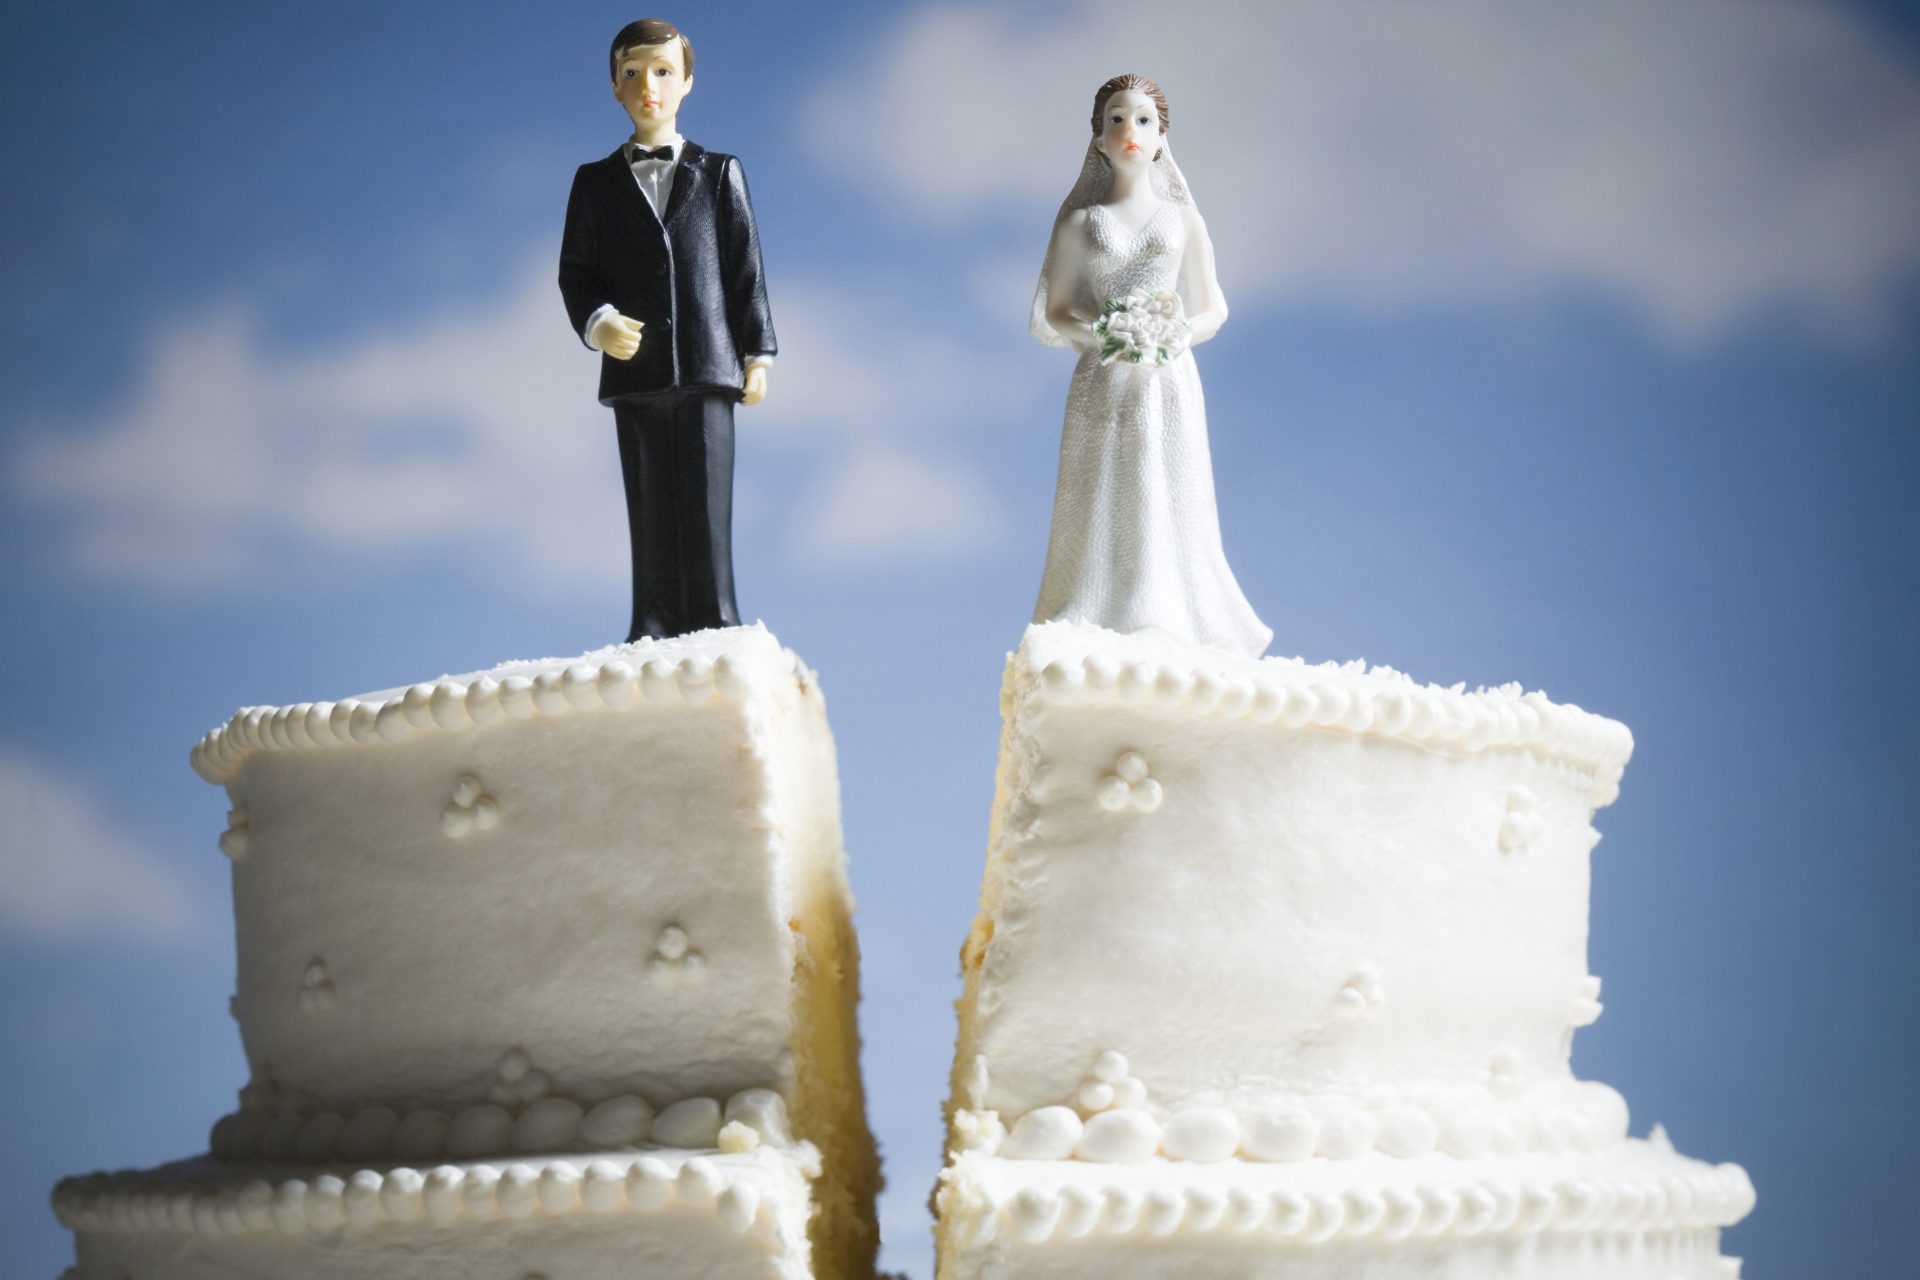 Which countries have the highest divorce rates in the world?